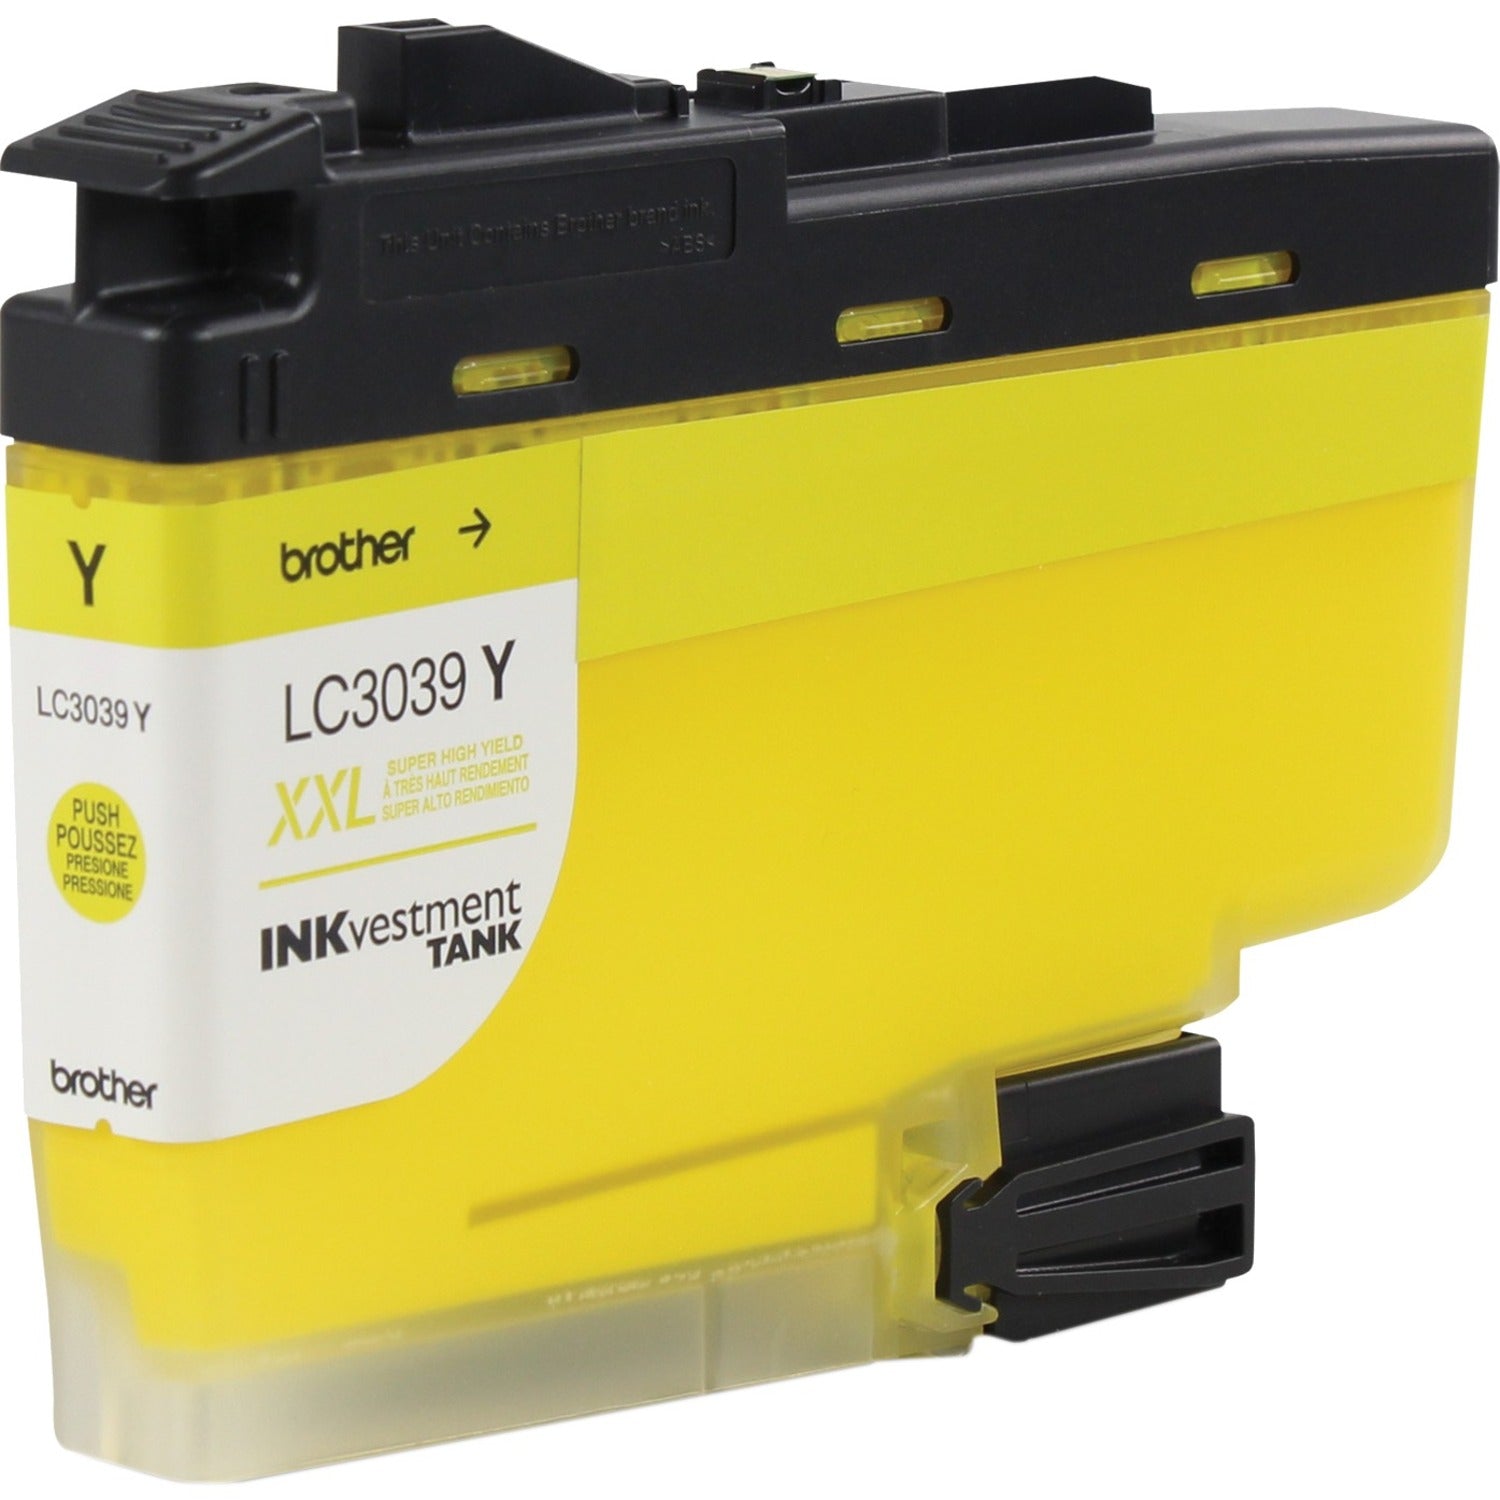 Brother LC3039YS Original Ultra High Yield Inkjet Ink Cartridge - Single Pack - Yellow - 1 Pack